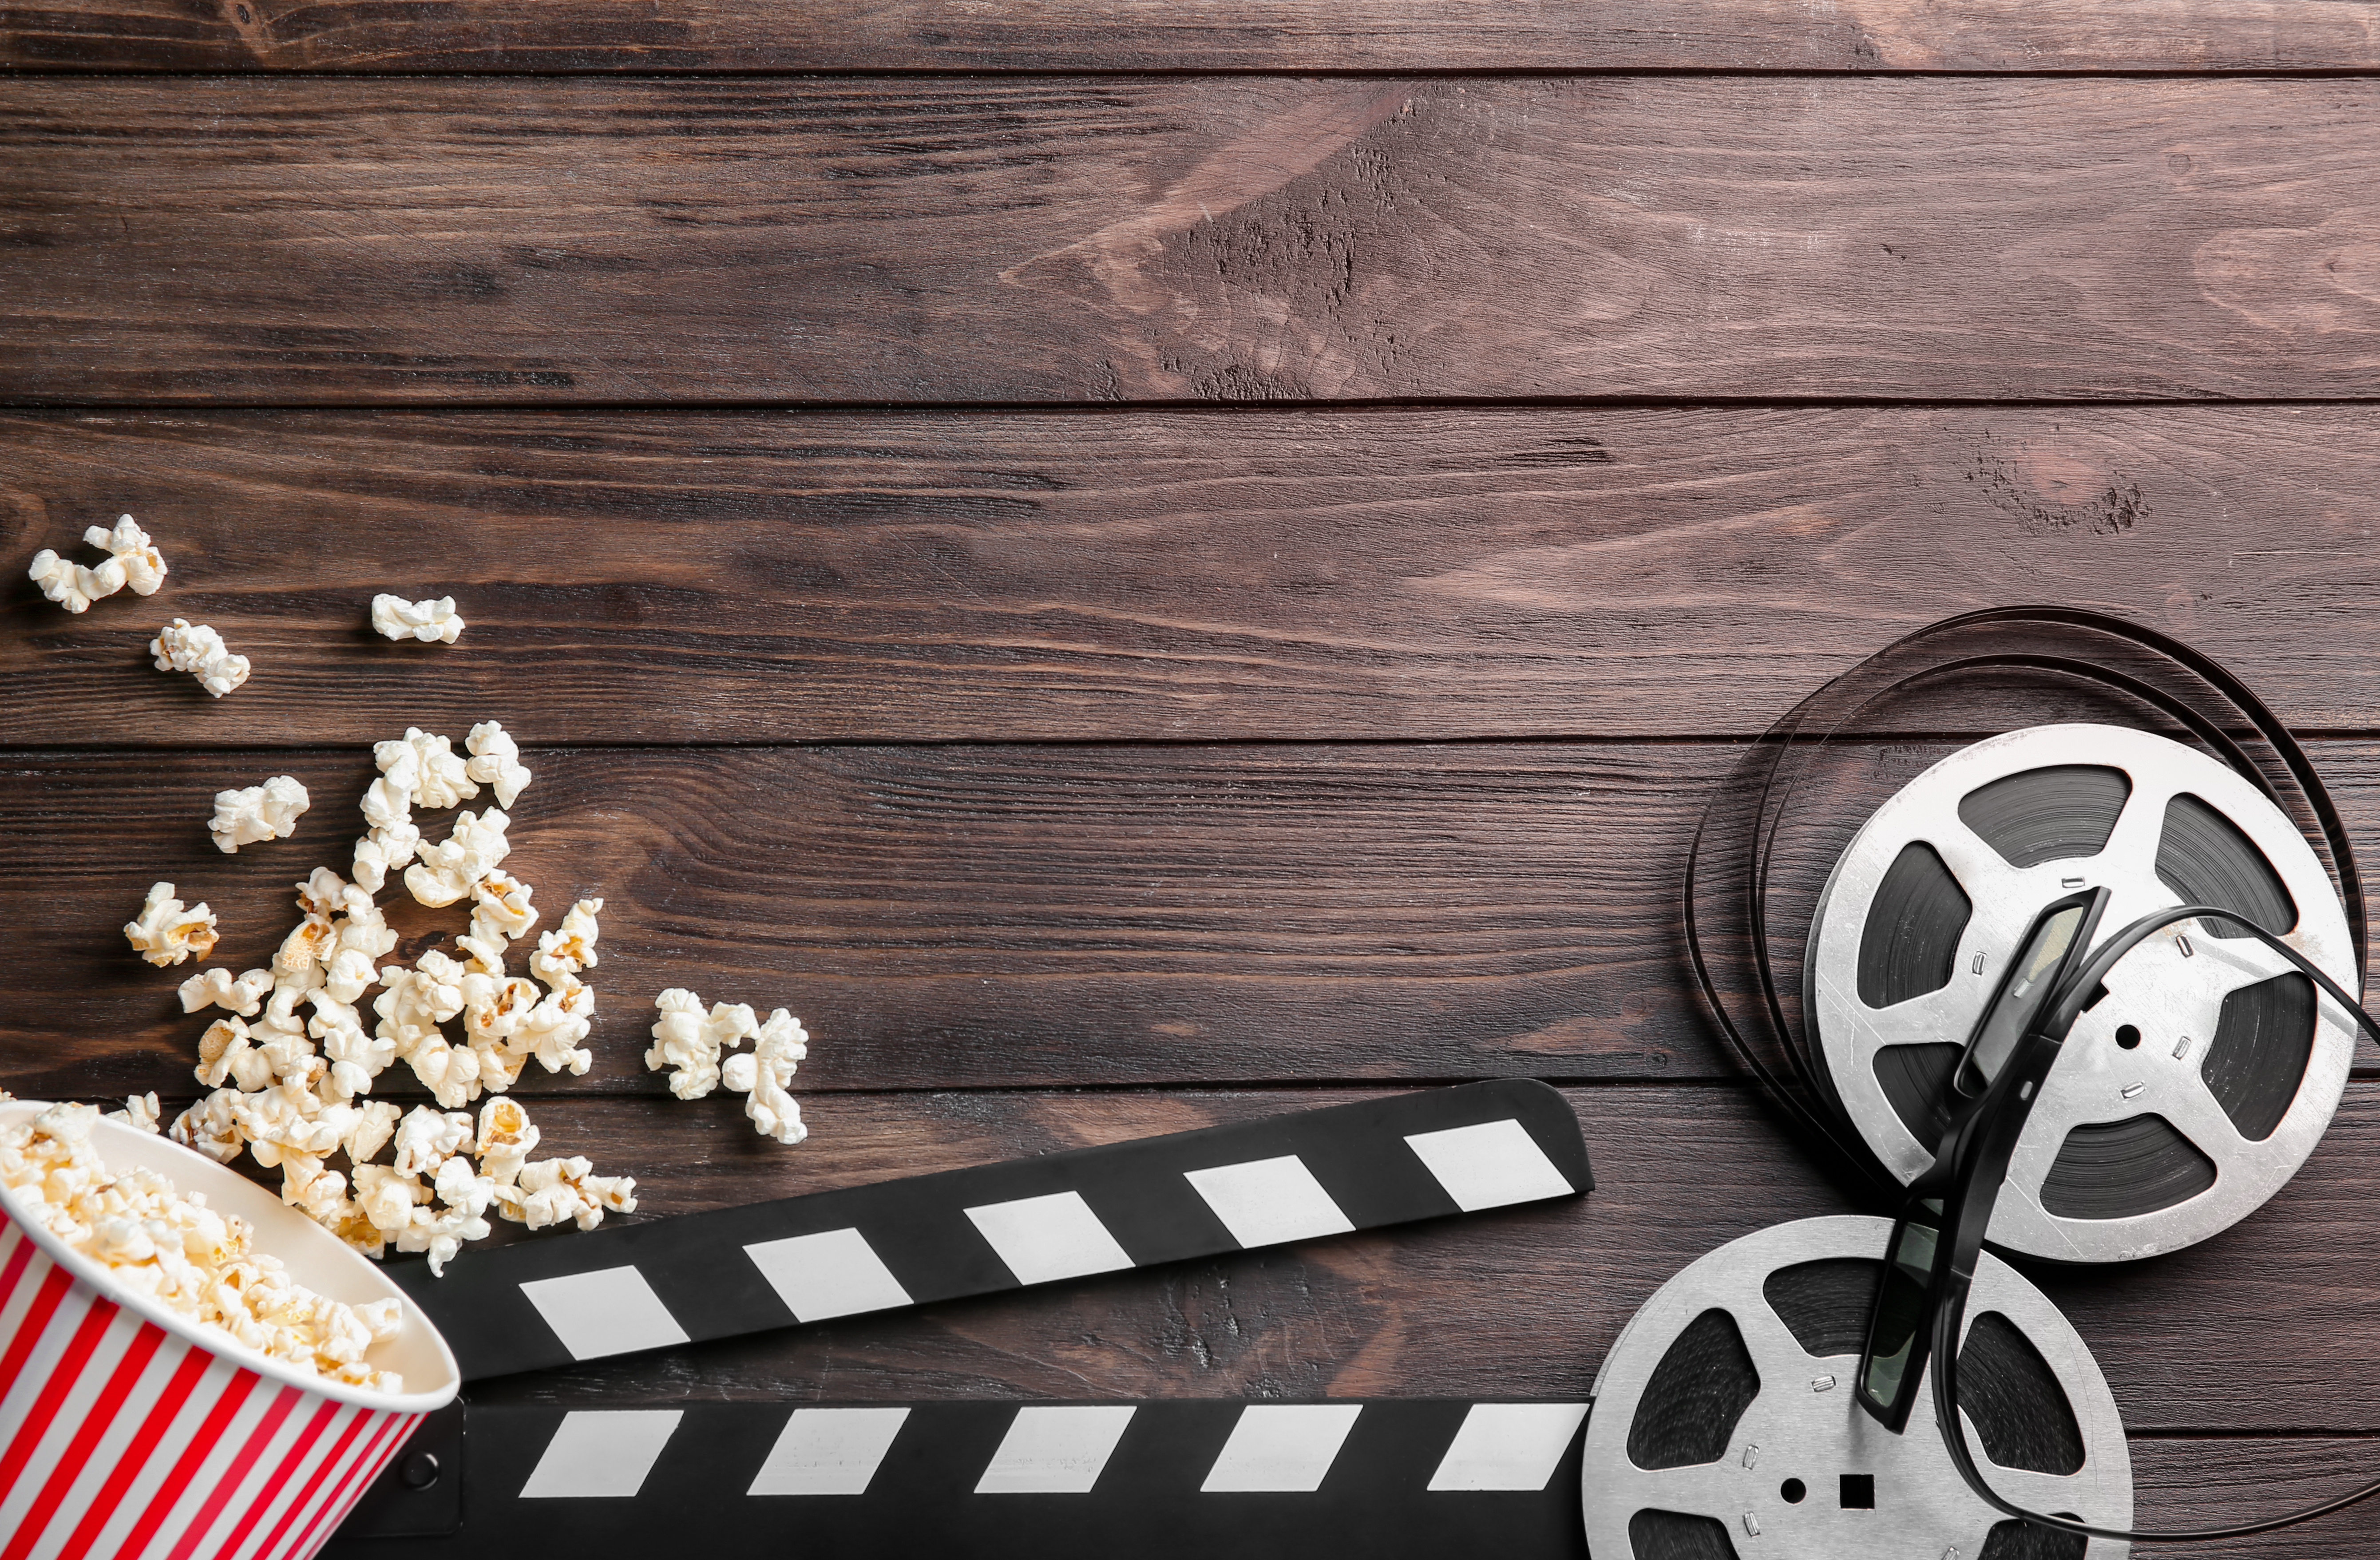 image of popcorn and filmmaking item against wood planks 